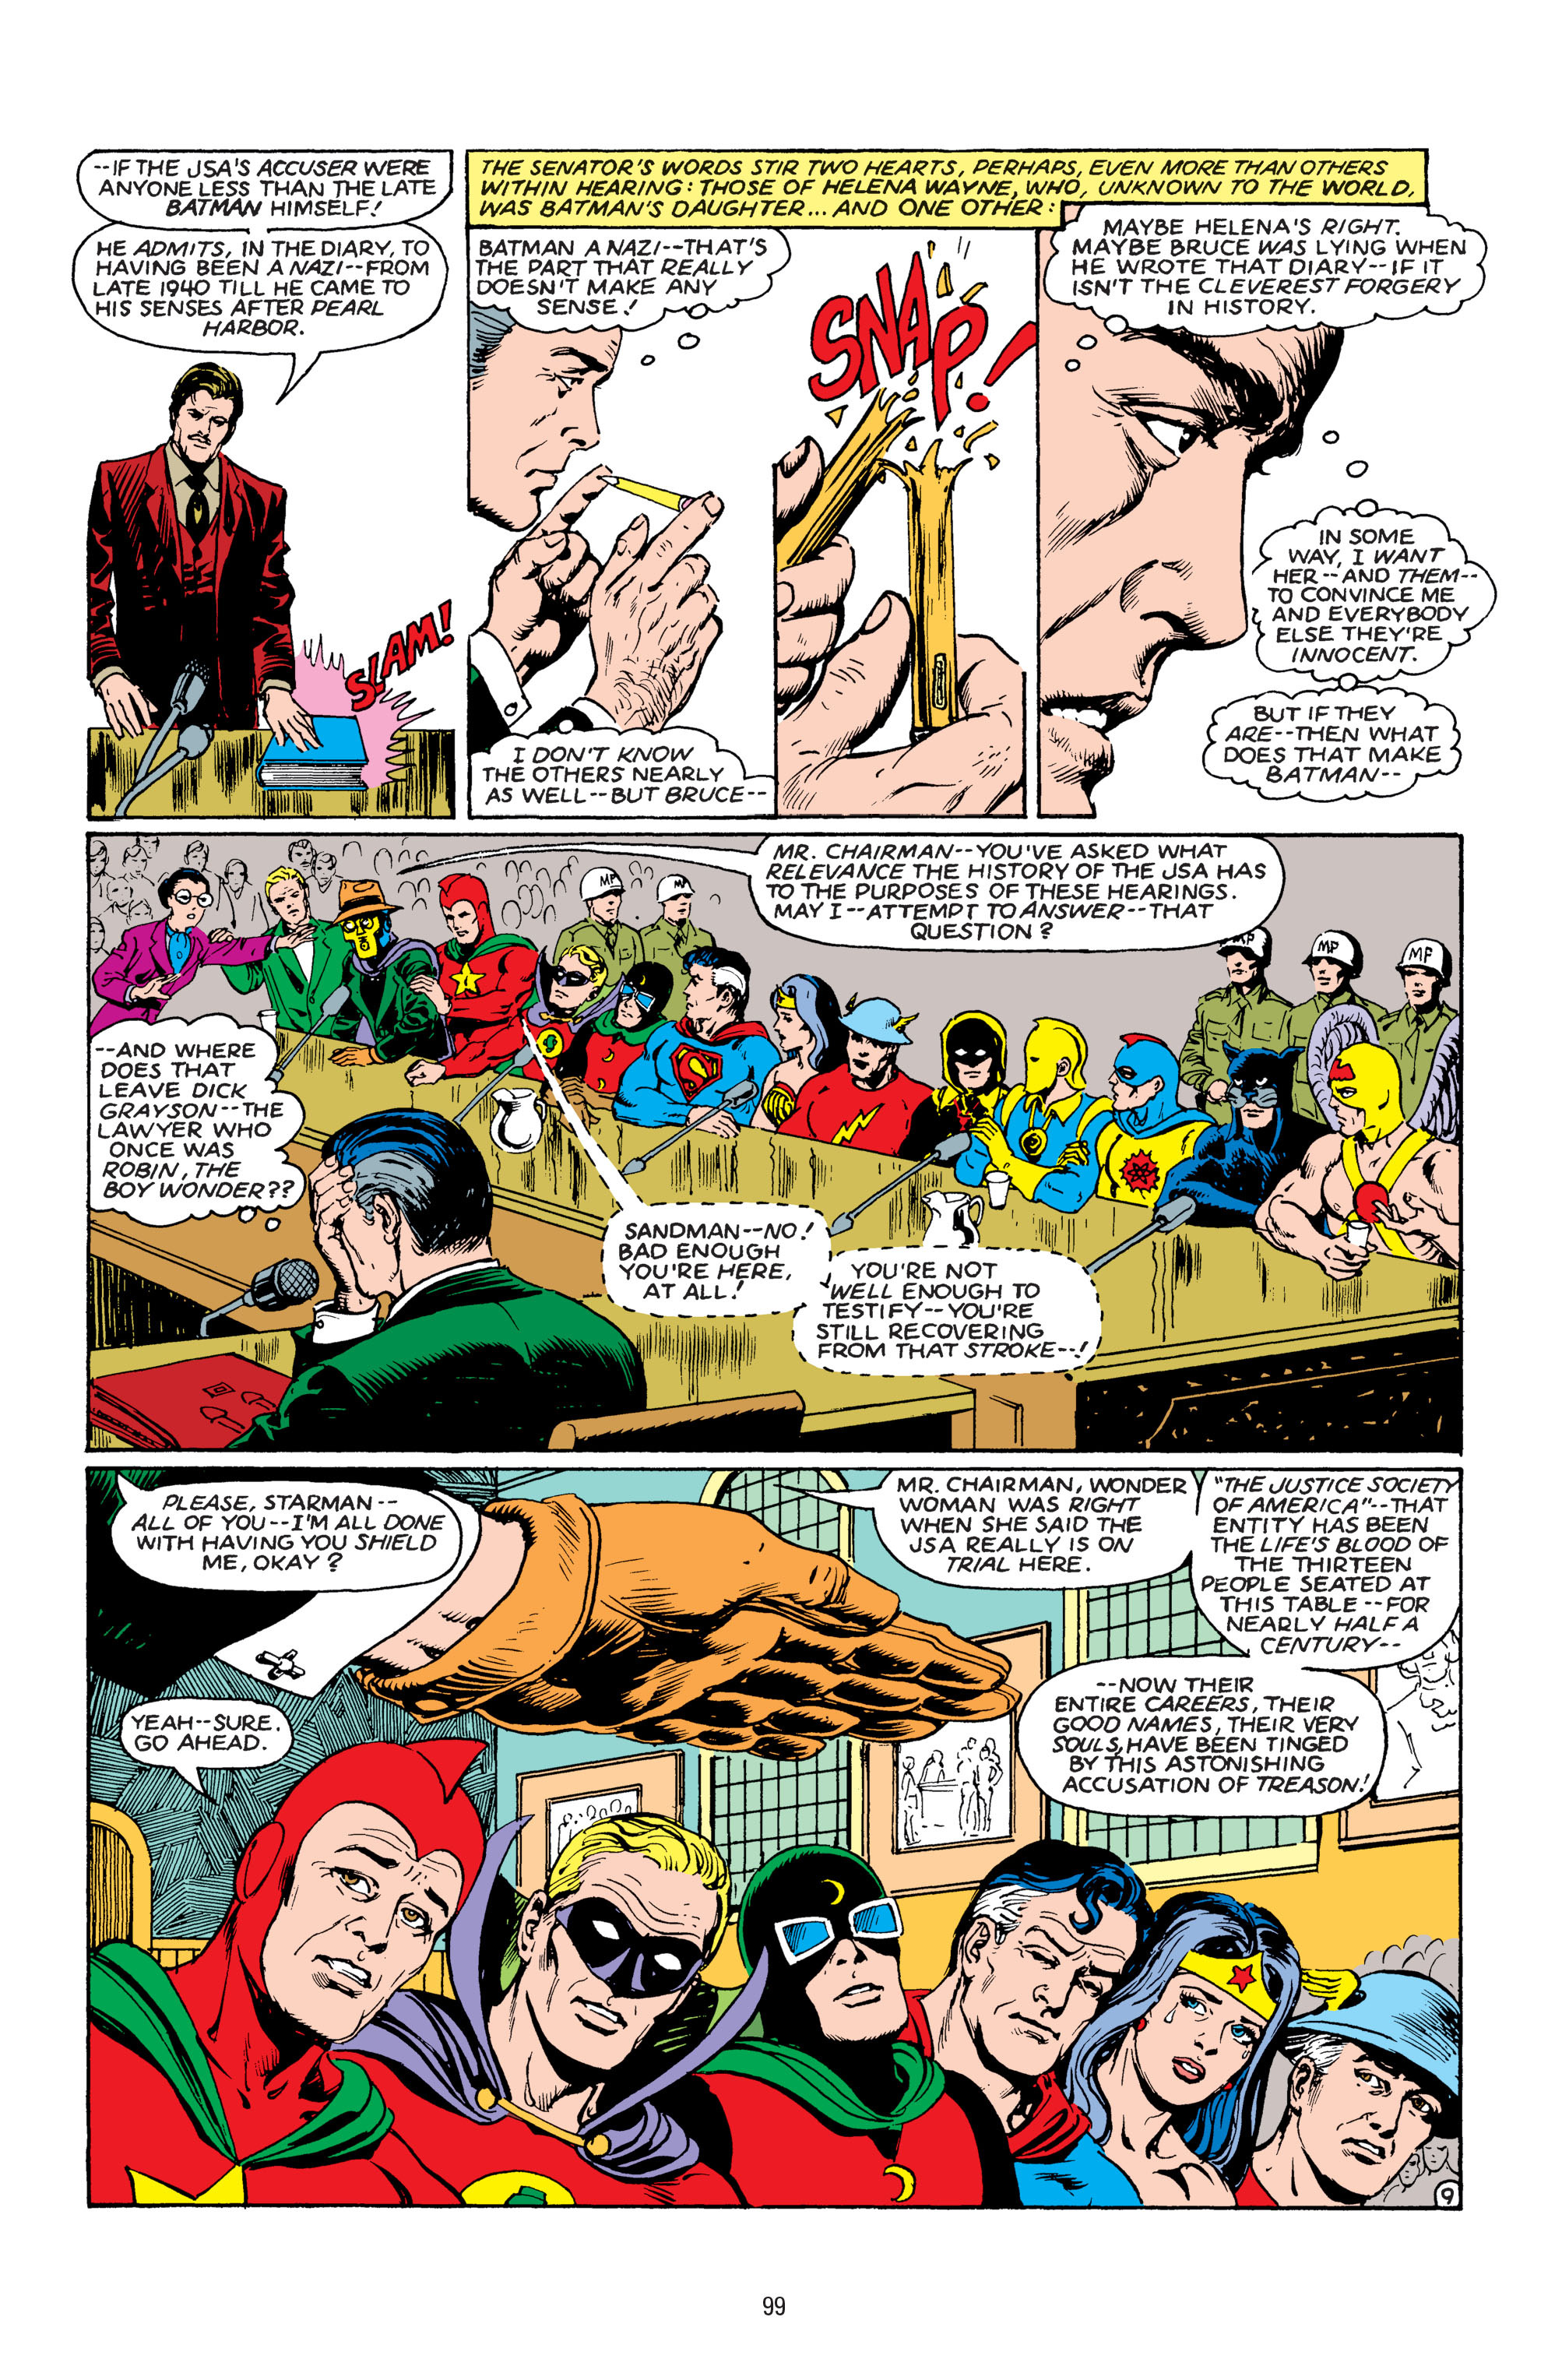 Read online America vs. the Justice Society comic -  Issue # TPB - 96